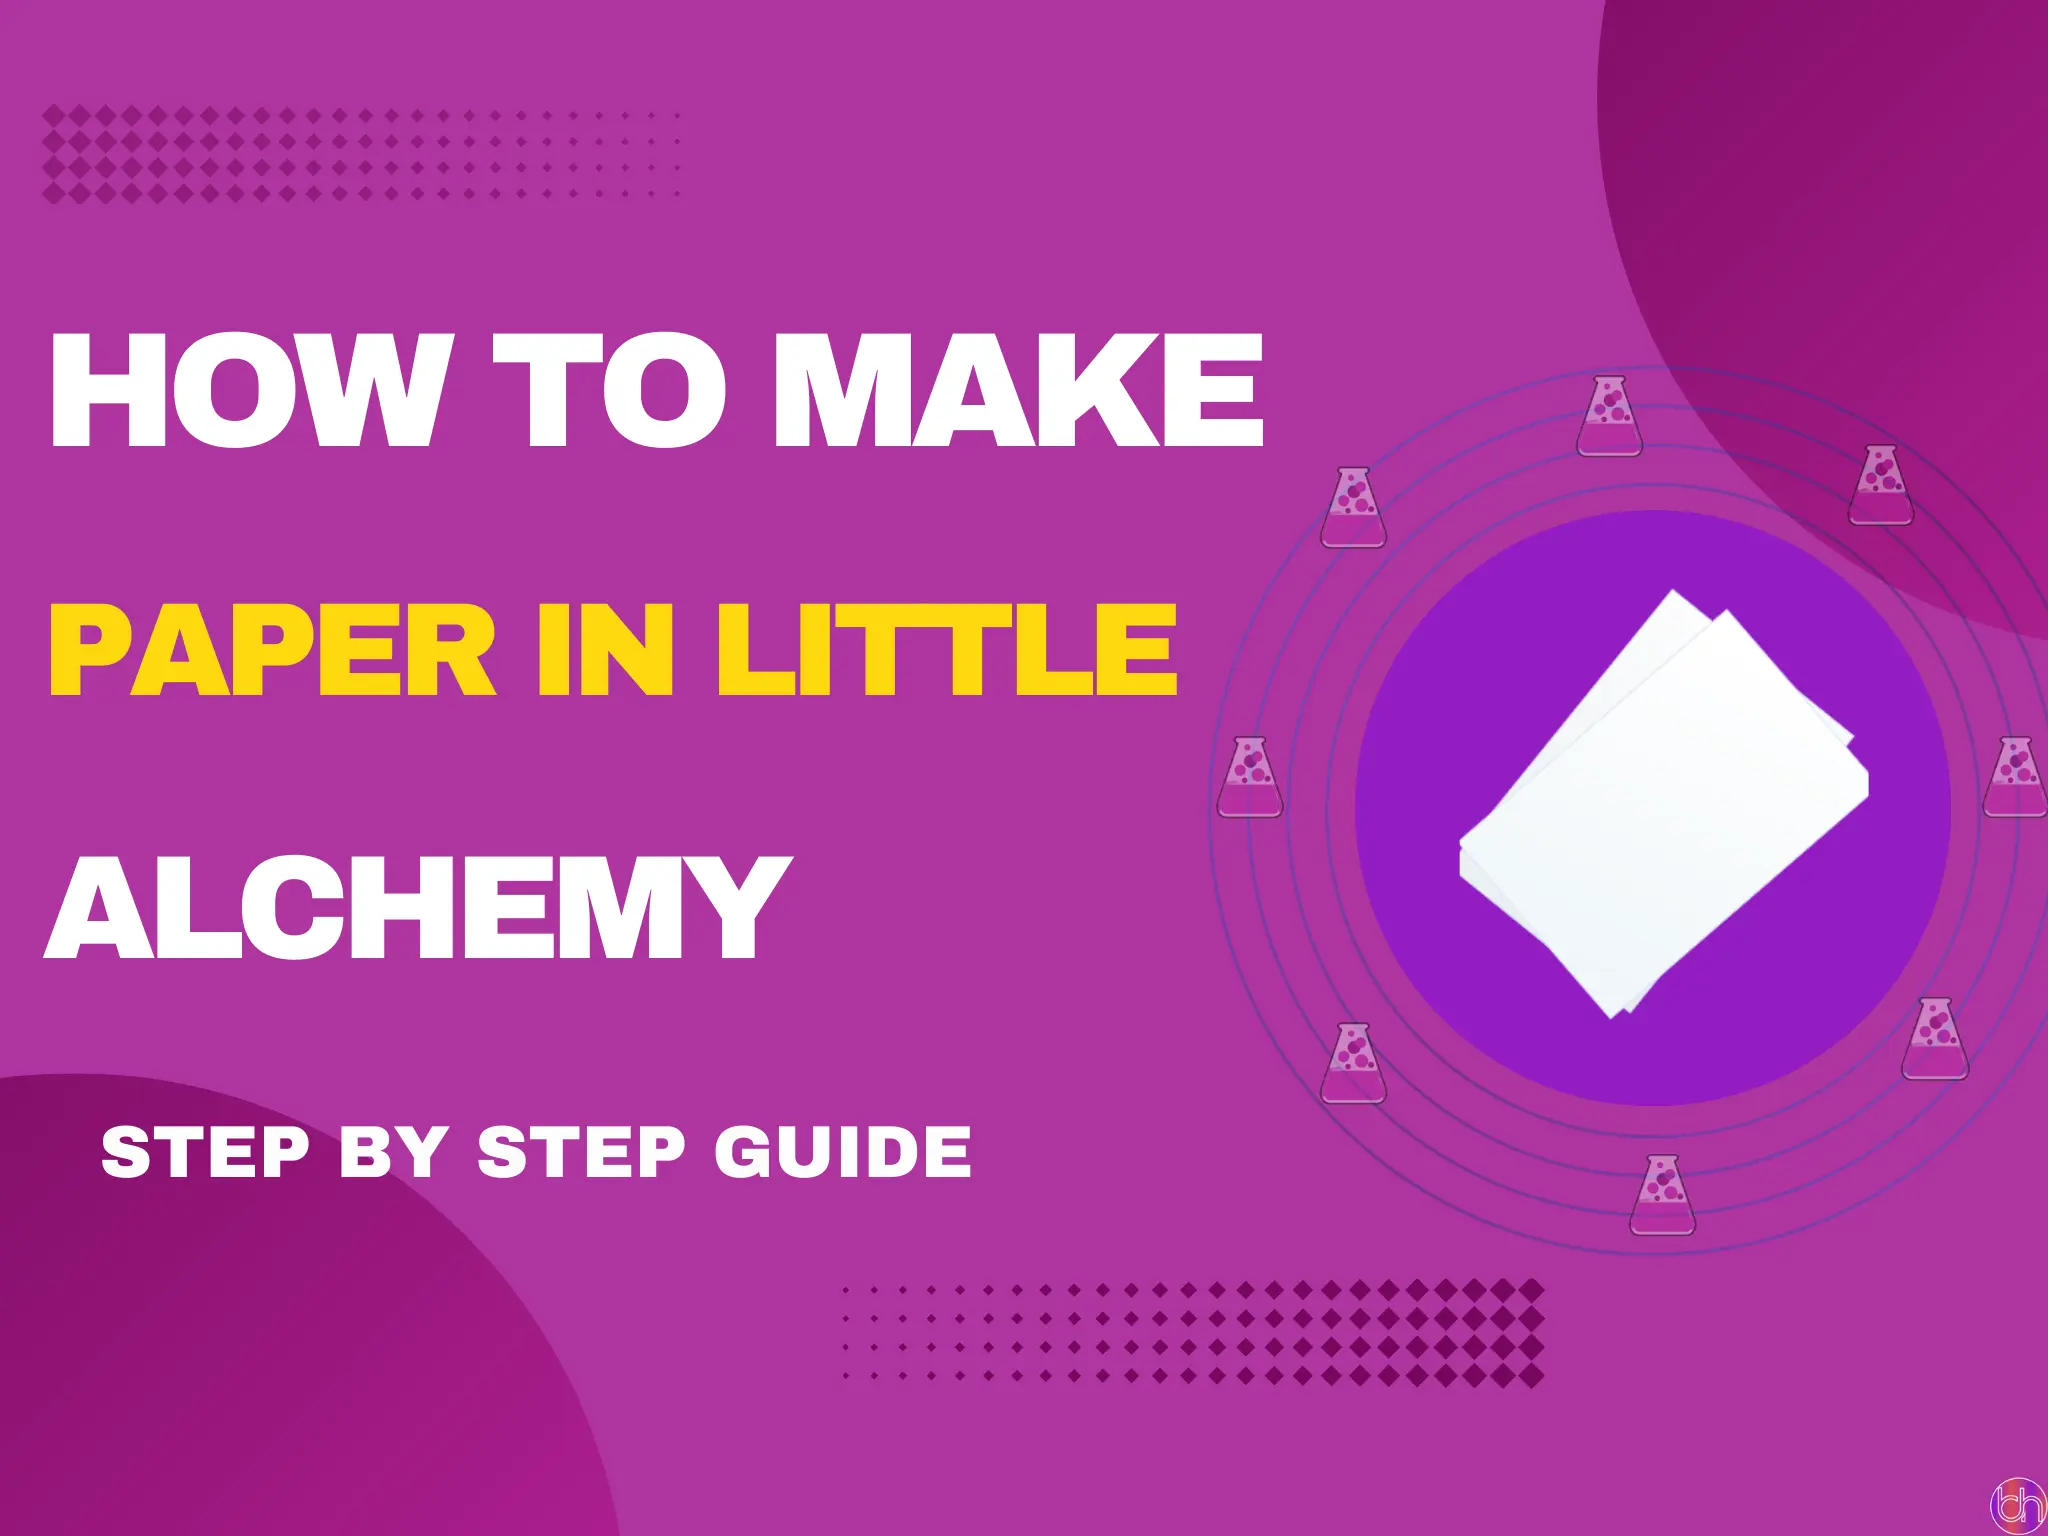 How to Make Life in little alchemy 2? (2024) - Barhow